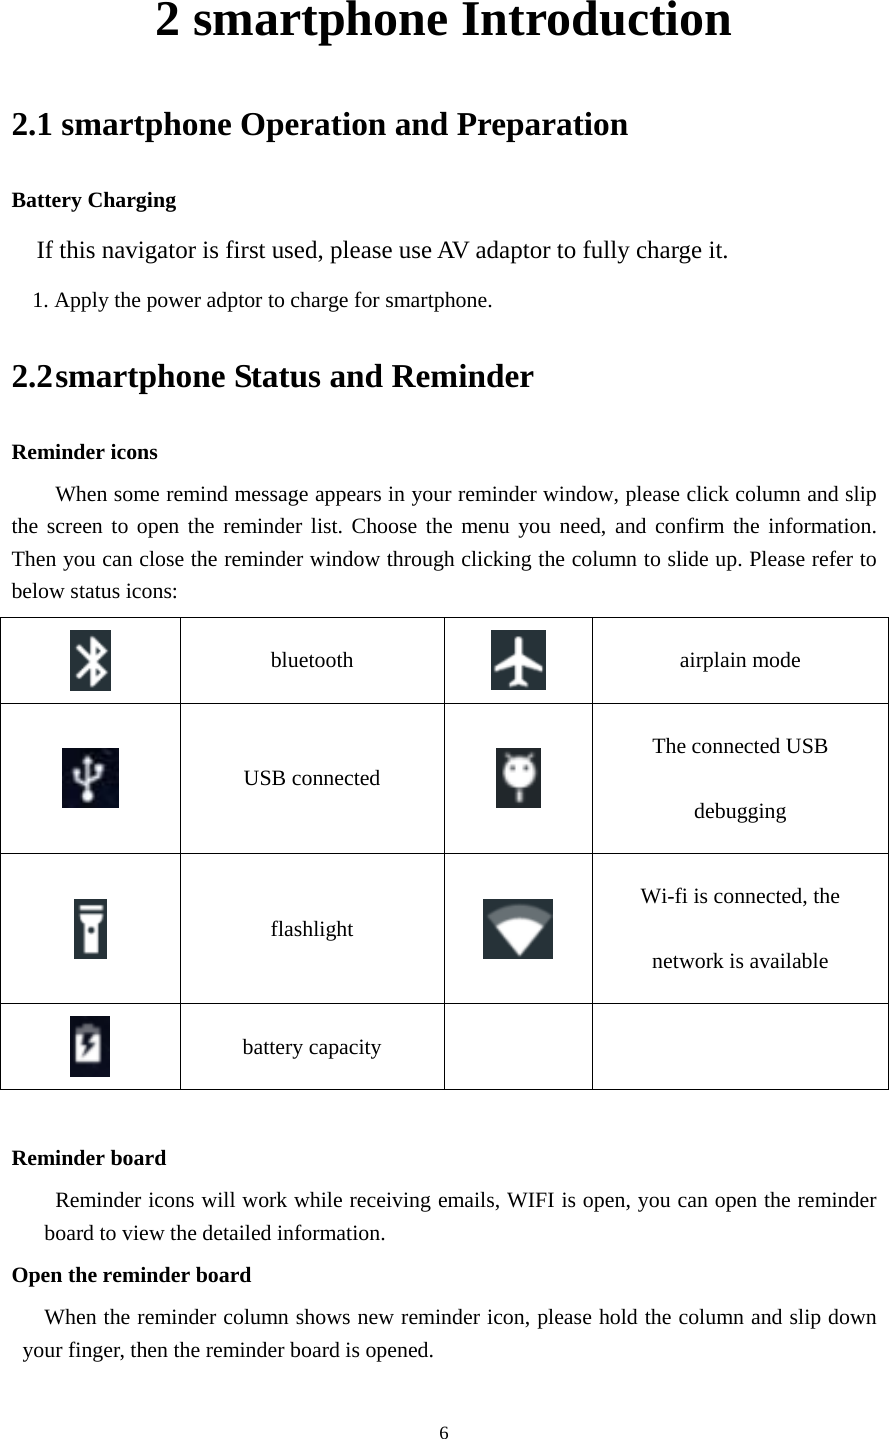     62 smartphone Introduction 2.1 smartphone Operation and Preparation Battery Charging If this navigator is first used, please use AV adaptor to fully charge it. 1. Apply the power adptor to charge for smartphone. 2.2 smartphone Status and Reminder Reminder icons When some remind message appears in your reminder window, please click column and slip the screen to open the reminder list. Choose the menu you need, and confirm the information. Then you can close the reminder window through clicking the column to slide up. Please refer to below status icons:    bluetooth  airplain mode  USB connected   The connected USB debugging  flashlight   Wi-fi is connected, the network is available  battery capacity     Reminder board   Reminder icons will work while receiving emails, WIFI is open, you can open the reminder board to view the detailed information. Open the reminder board When the reminder column shows new reminder icon, please hold the column and slip down your finger, then the reminder board is opened.  